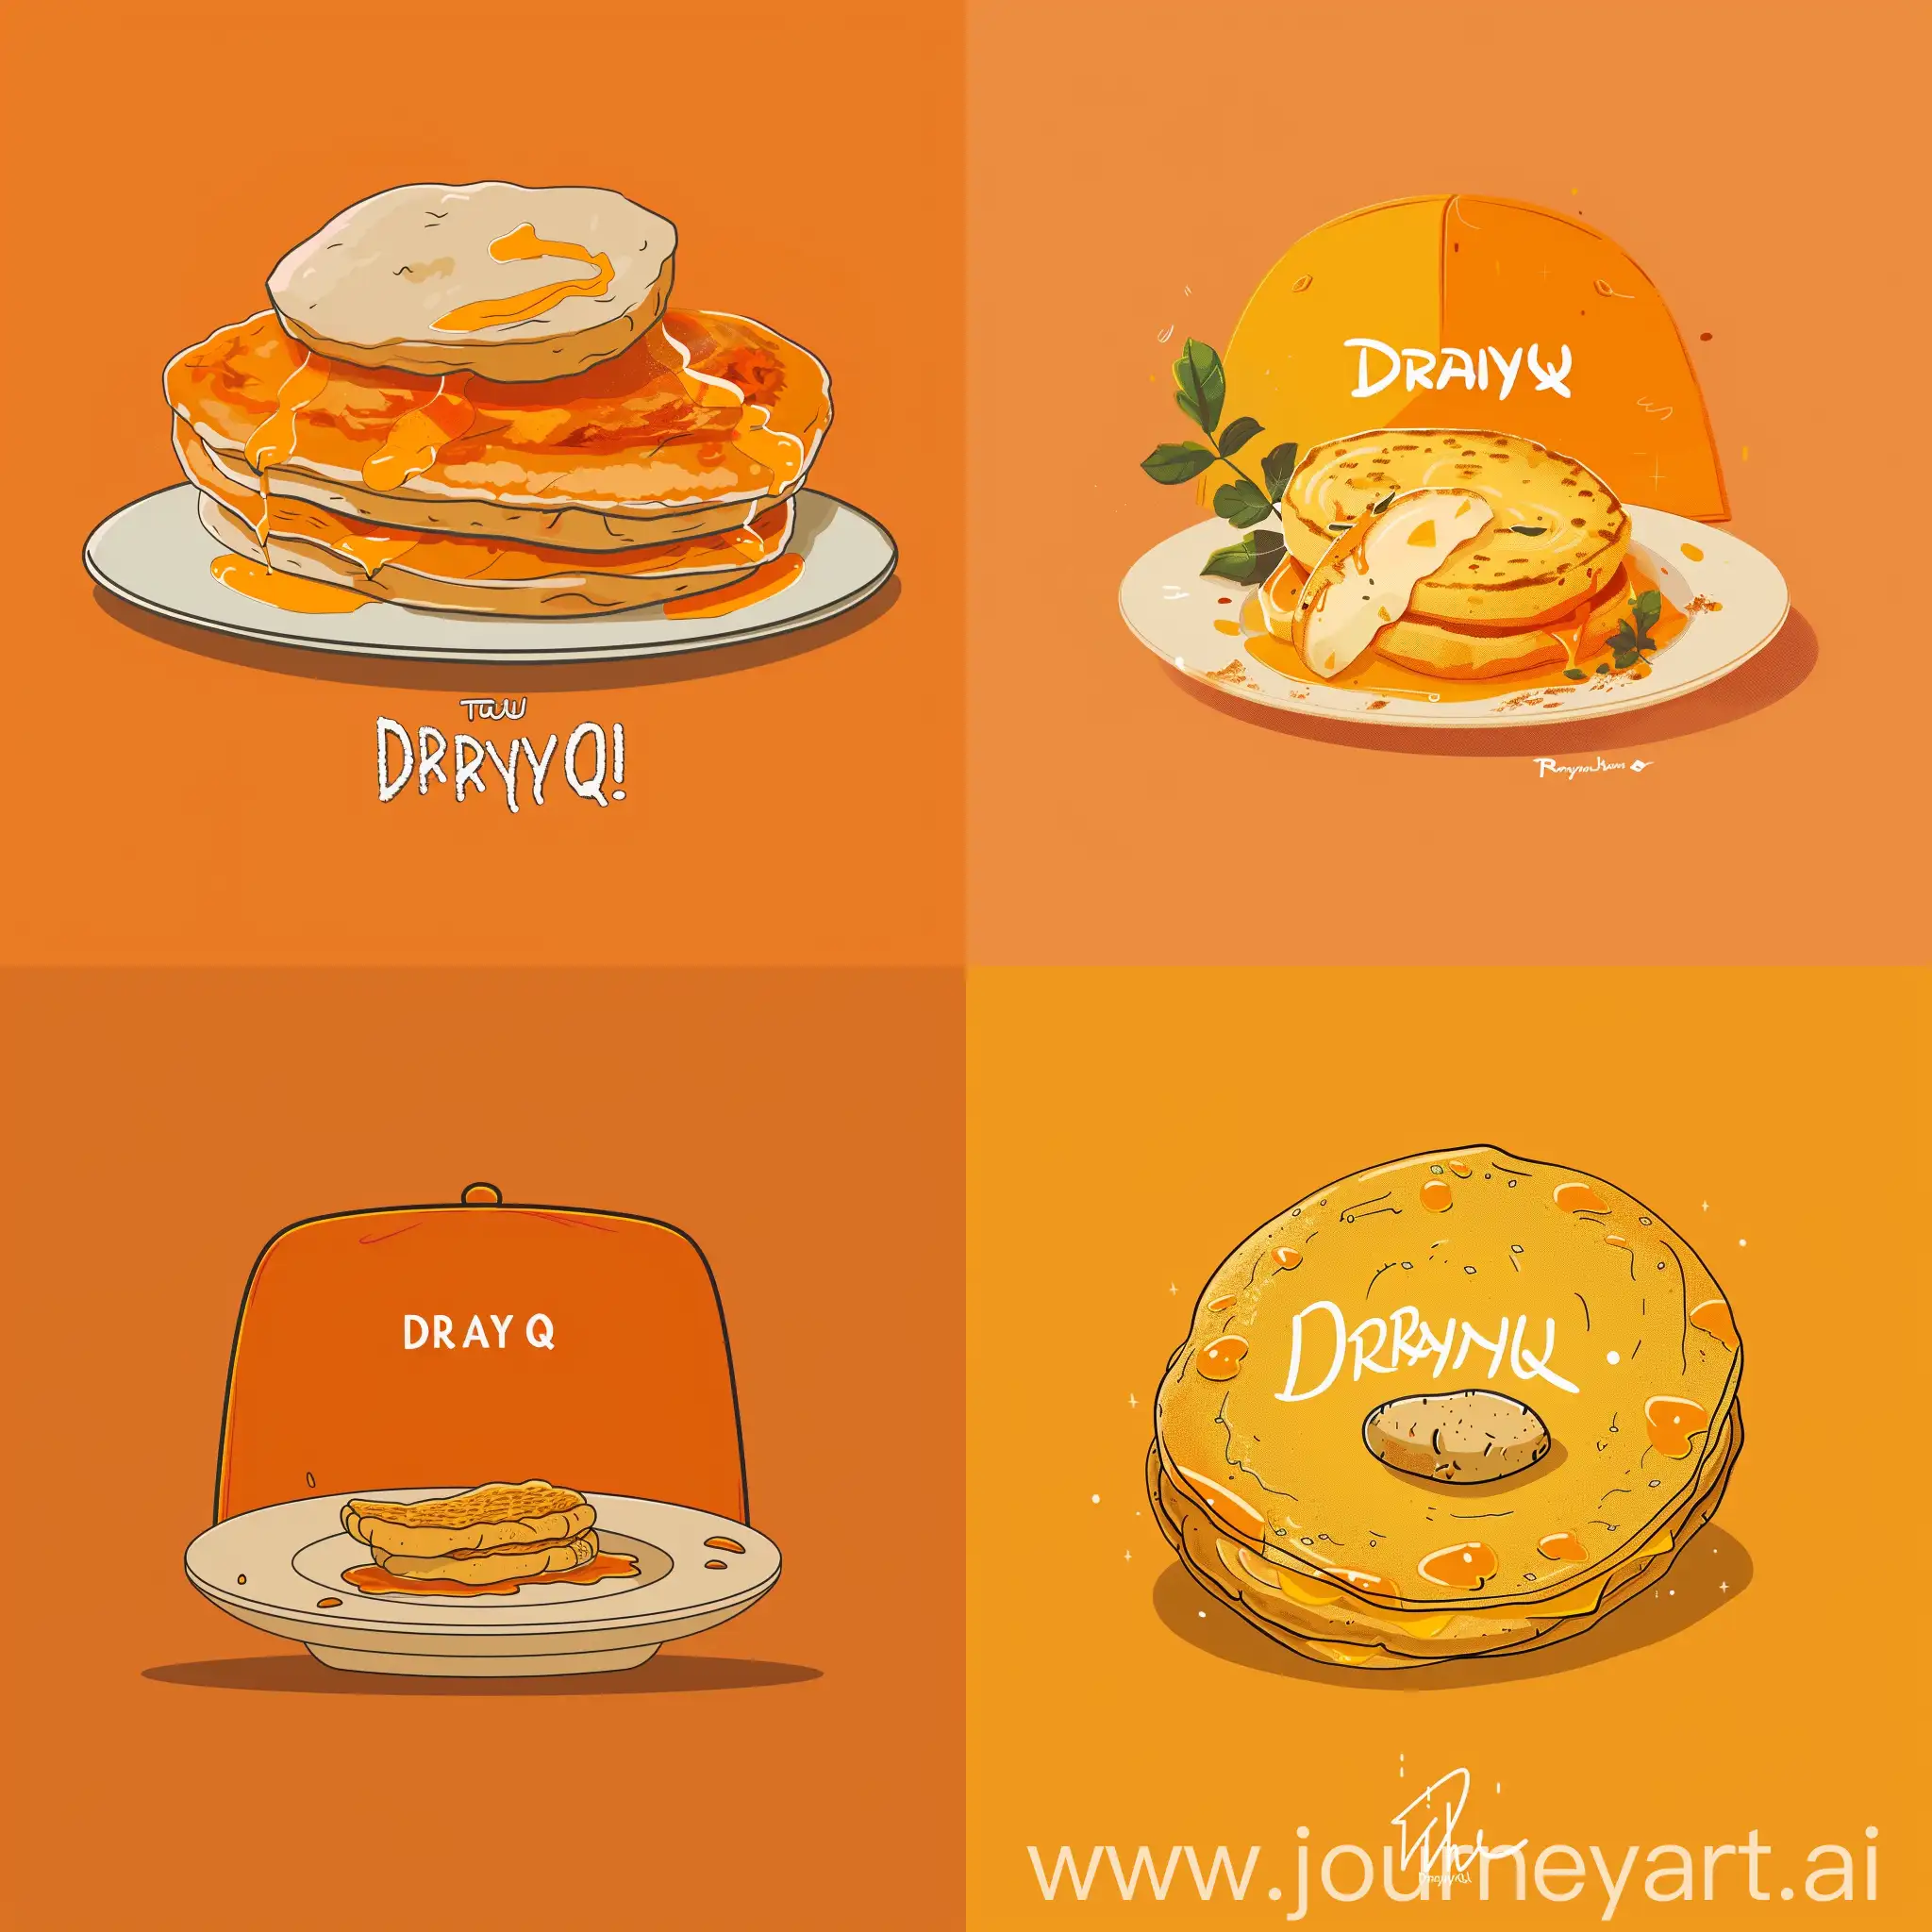 draw me a YouTube channel cap with the name DranyQ in an orange palette in a minimalist style, with a potato pancake in the picture. also, there should be no unnecessary things or people in the picture